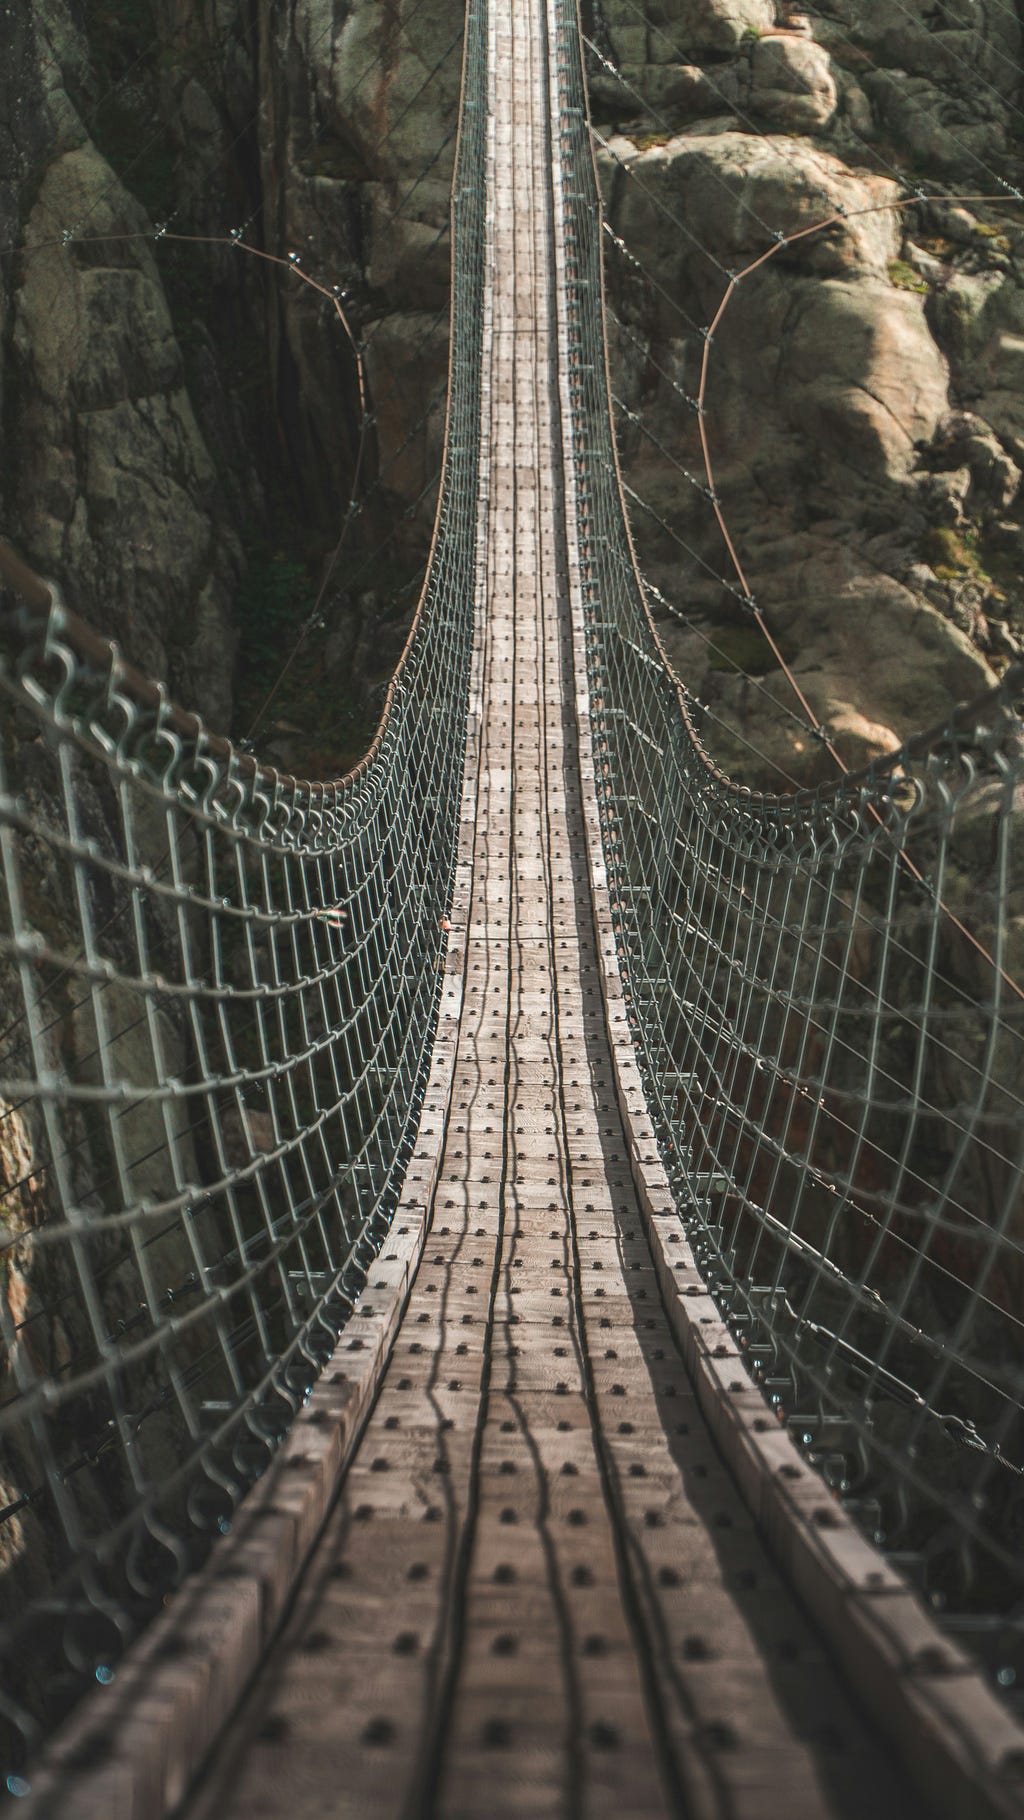 A long rope bridge drops precariously over the ravine and runs far into the distance. There are rocky outcrops all along the sides of the bridge.